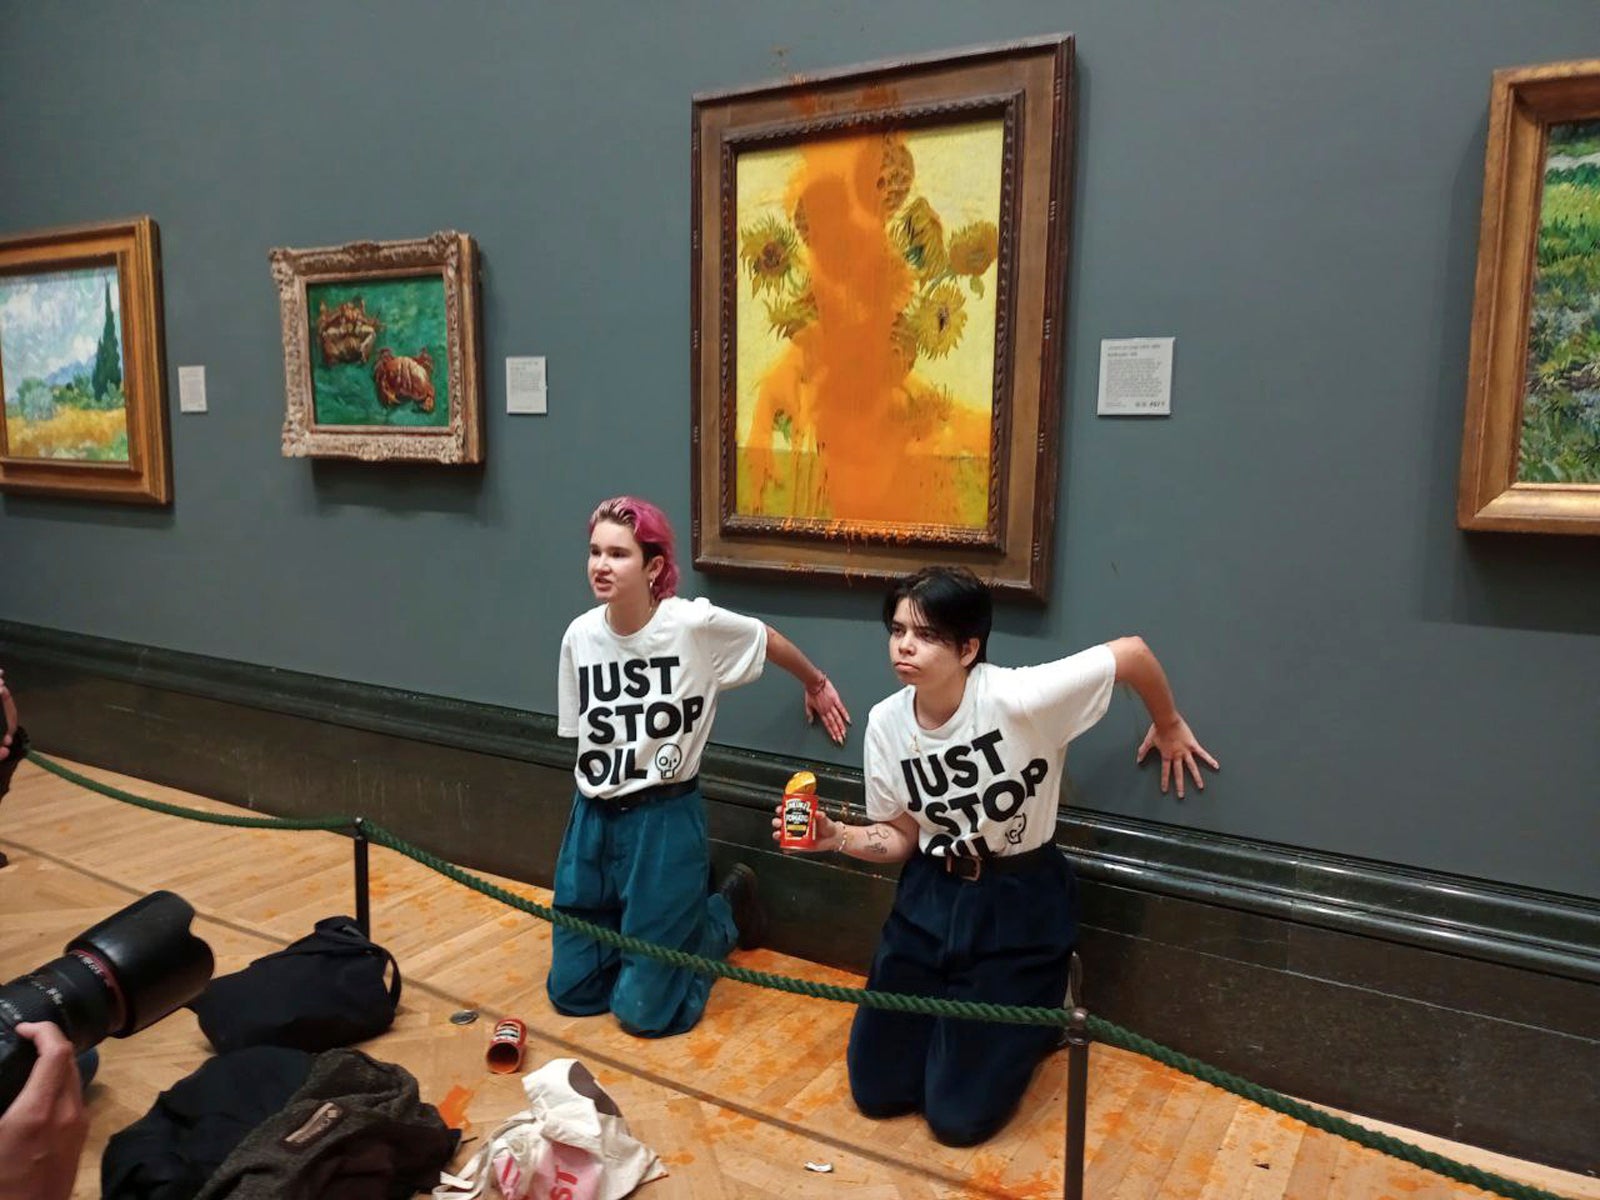 Just Stop Oil protesters glued themselves to the wall after throwing tinned soup at Vincent Van Gogh's famous 1888 work ‘Sunflowers’ at the National Gallery in London on October 14